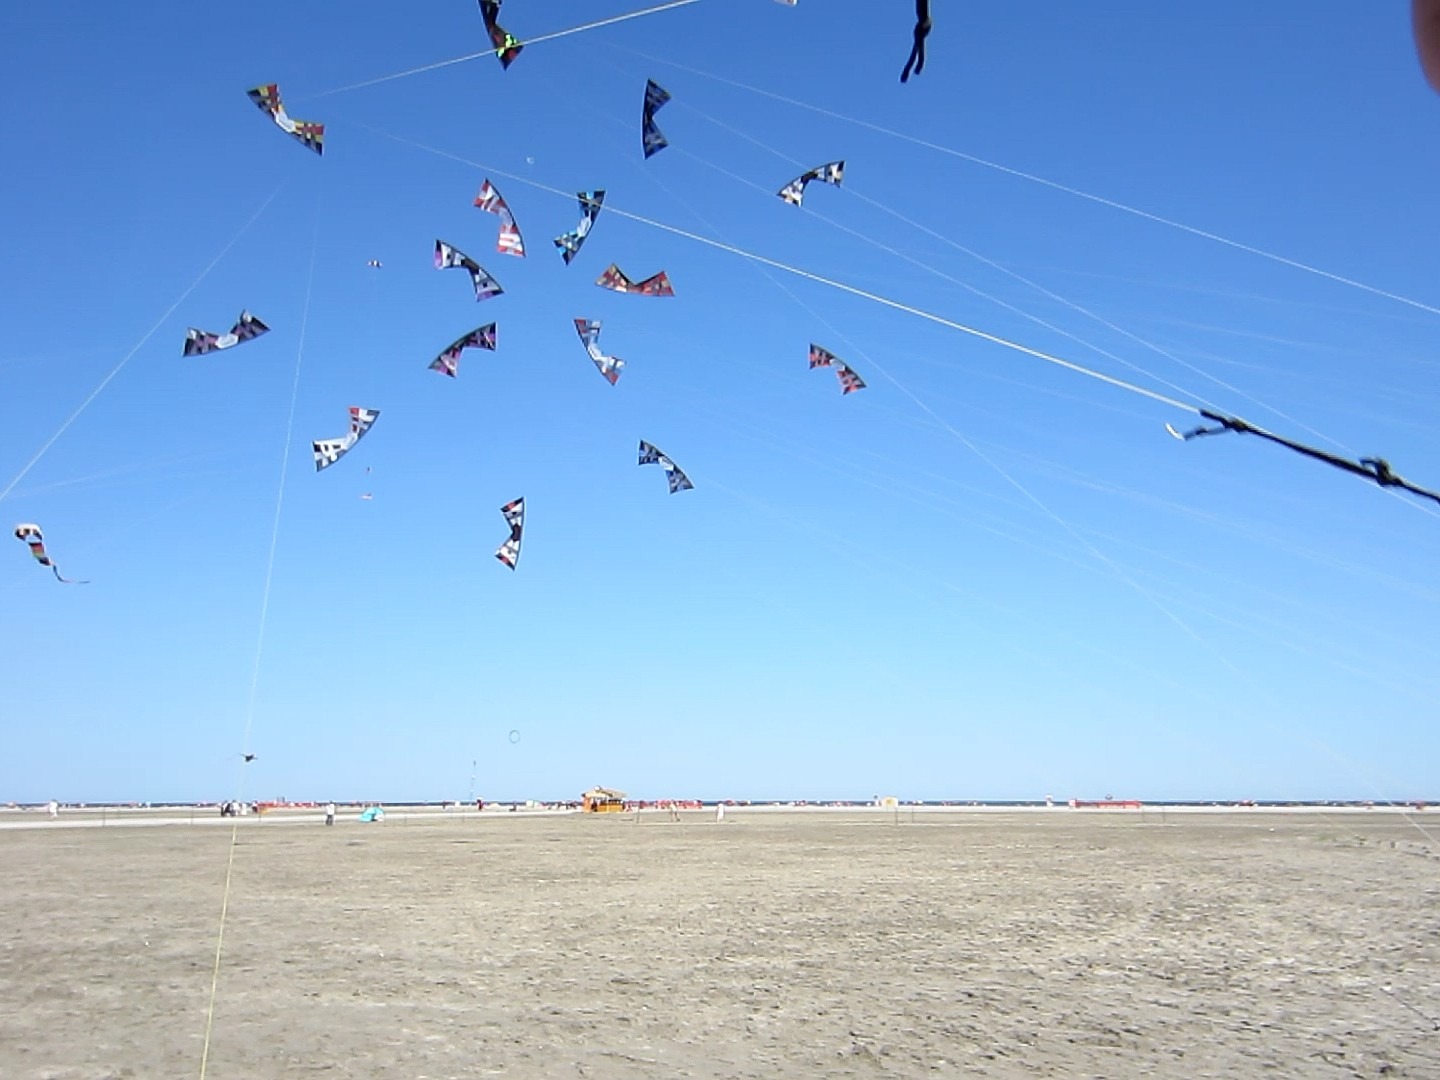 A blue sky with flying kites